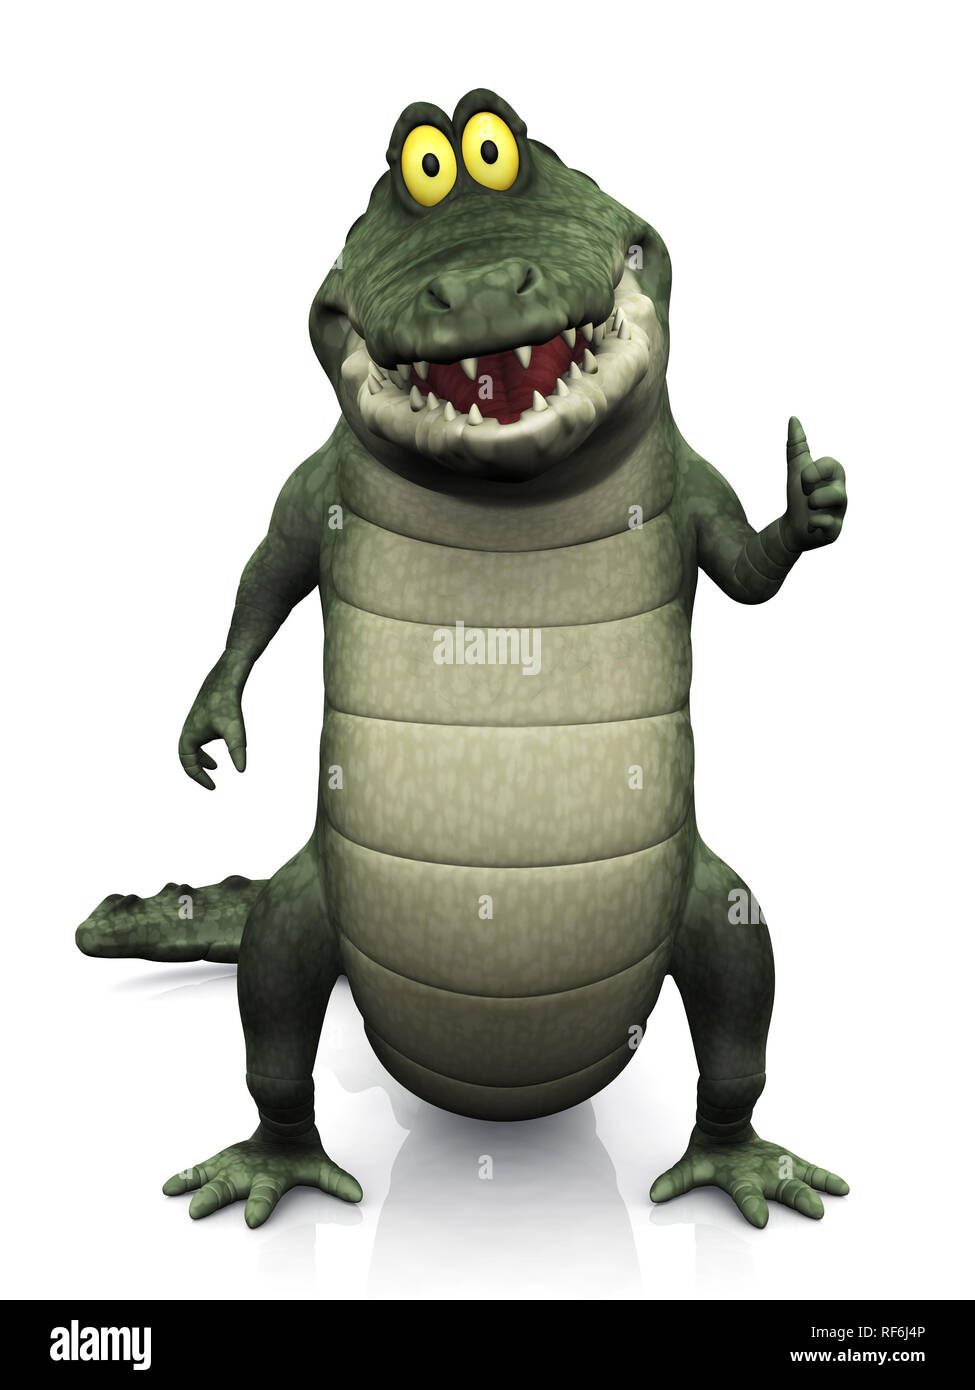 An adorable smiling friendly cartoon crocodile doing a thumbs up with his hand. White background. Stock Photo